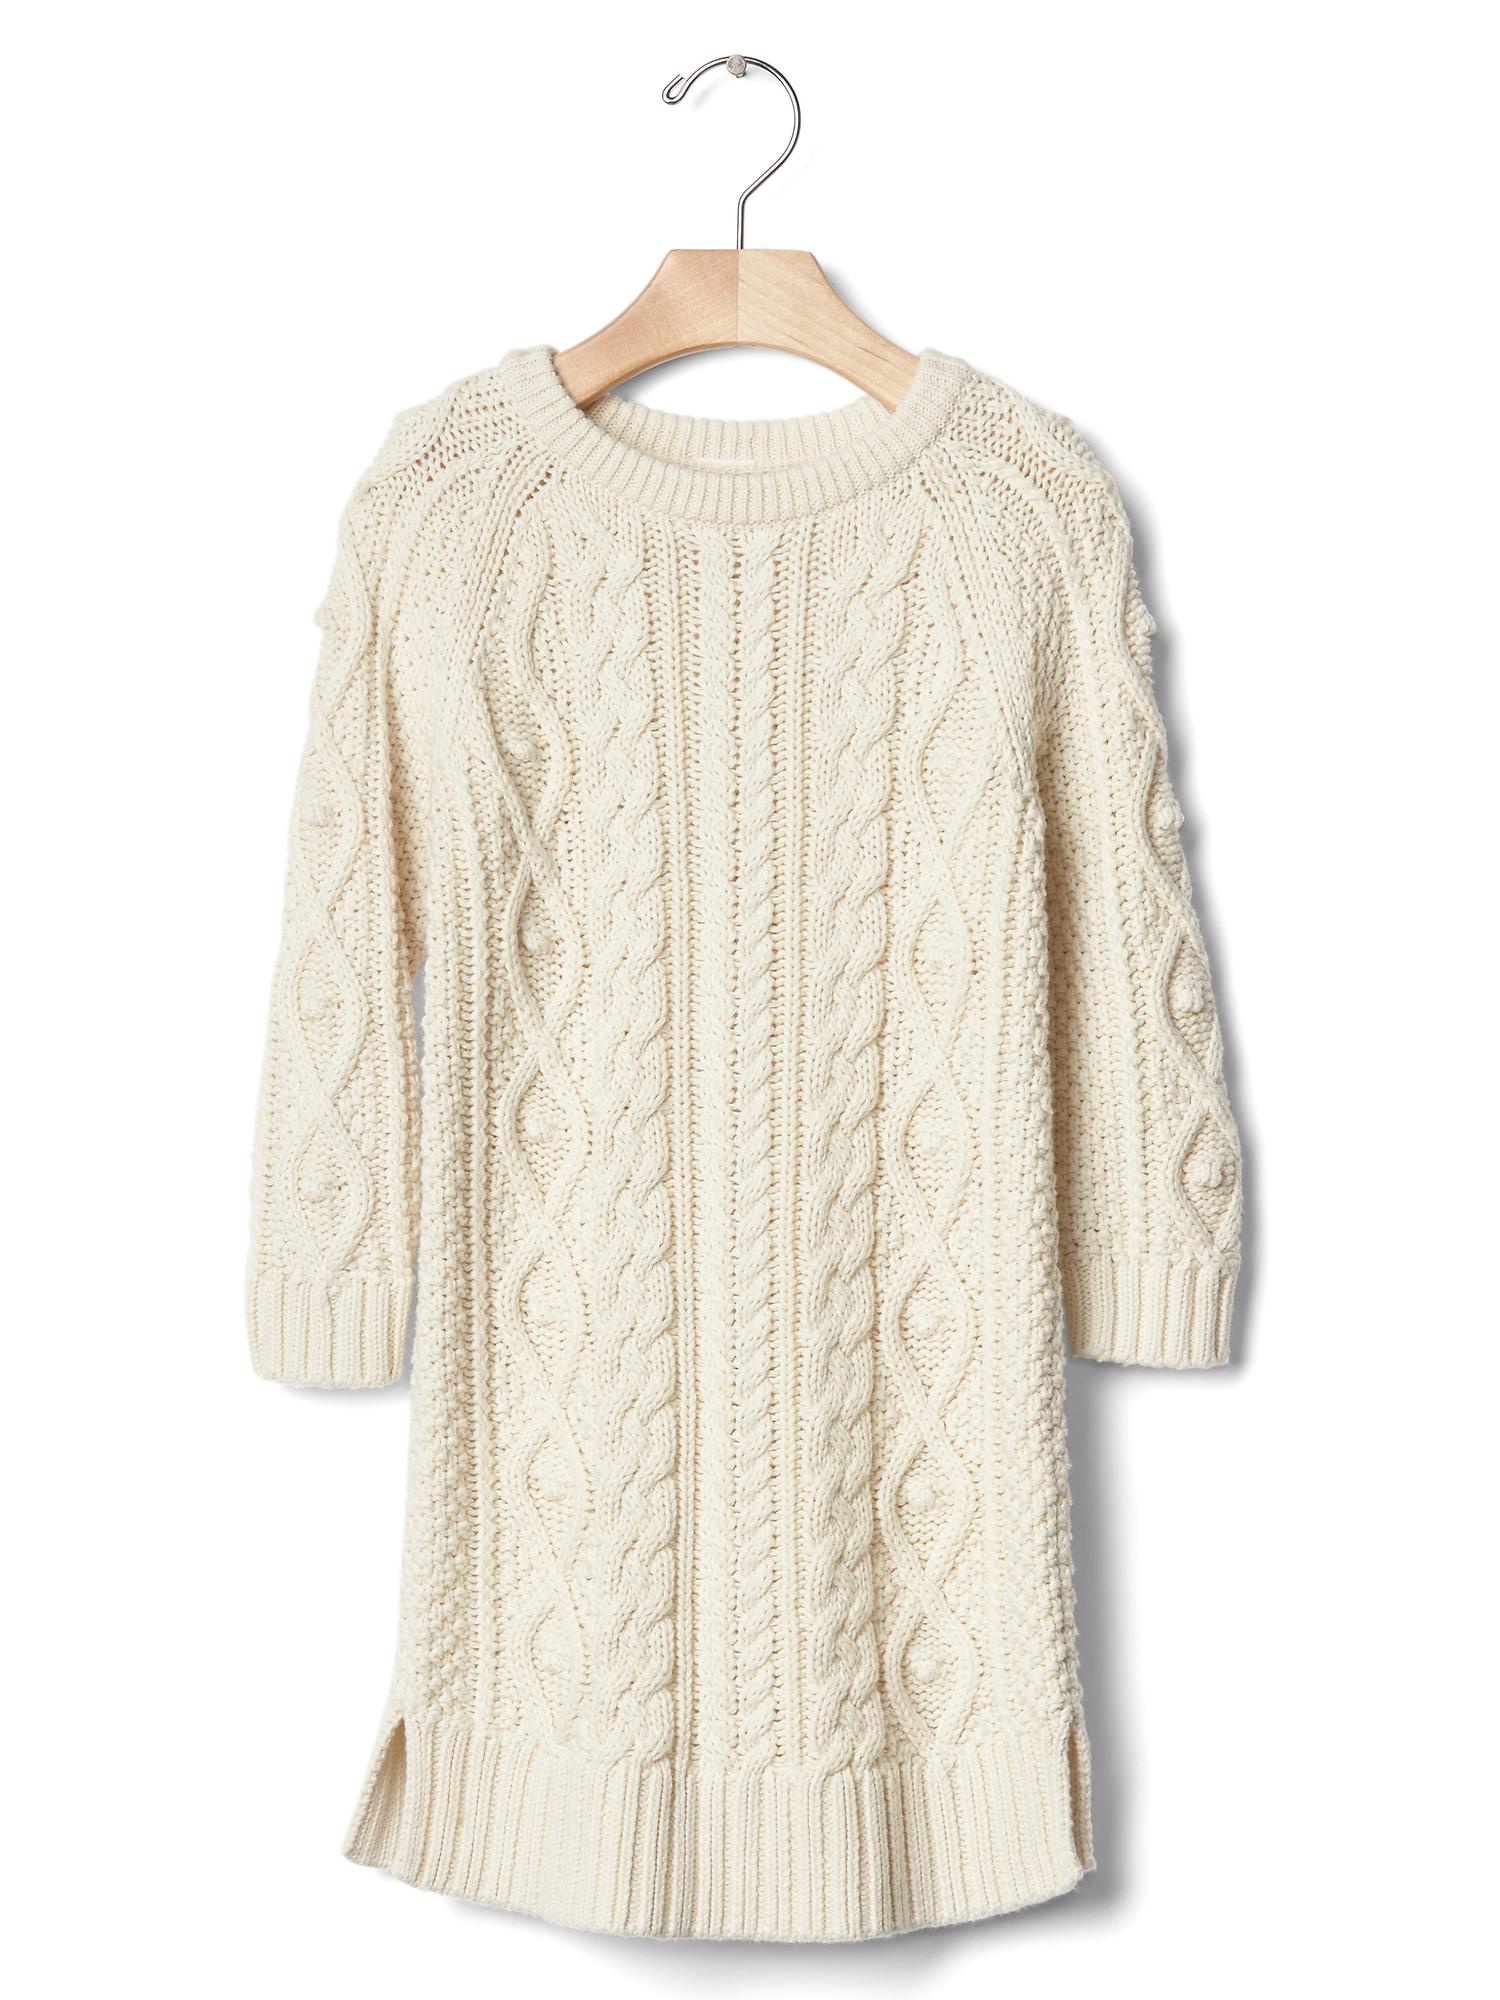 Cream Chunky Cable Knit Sweater Dress